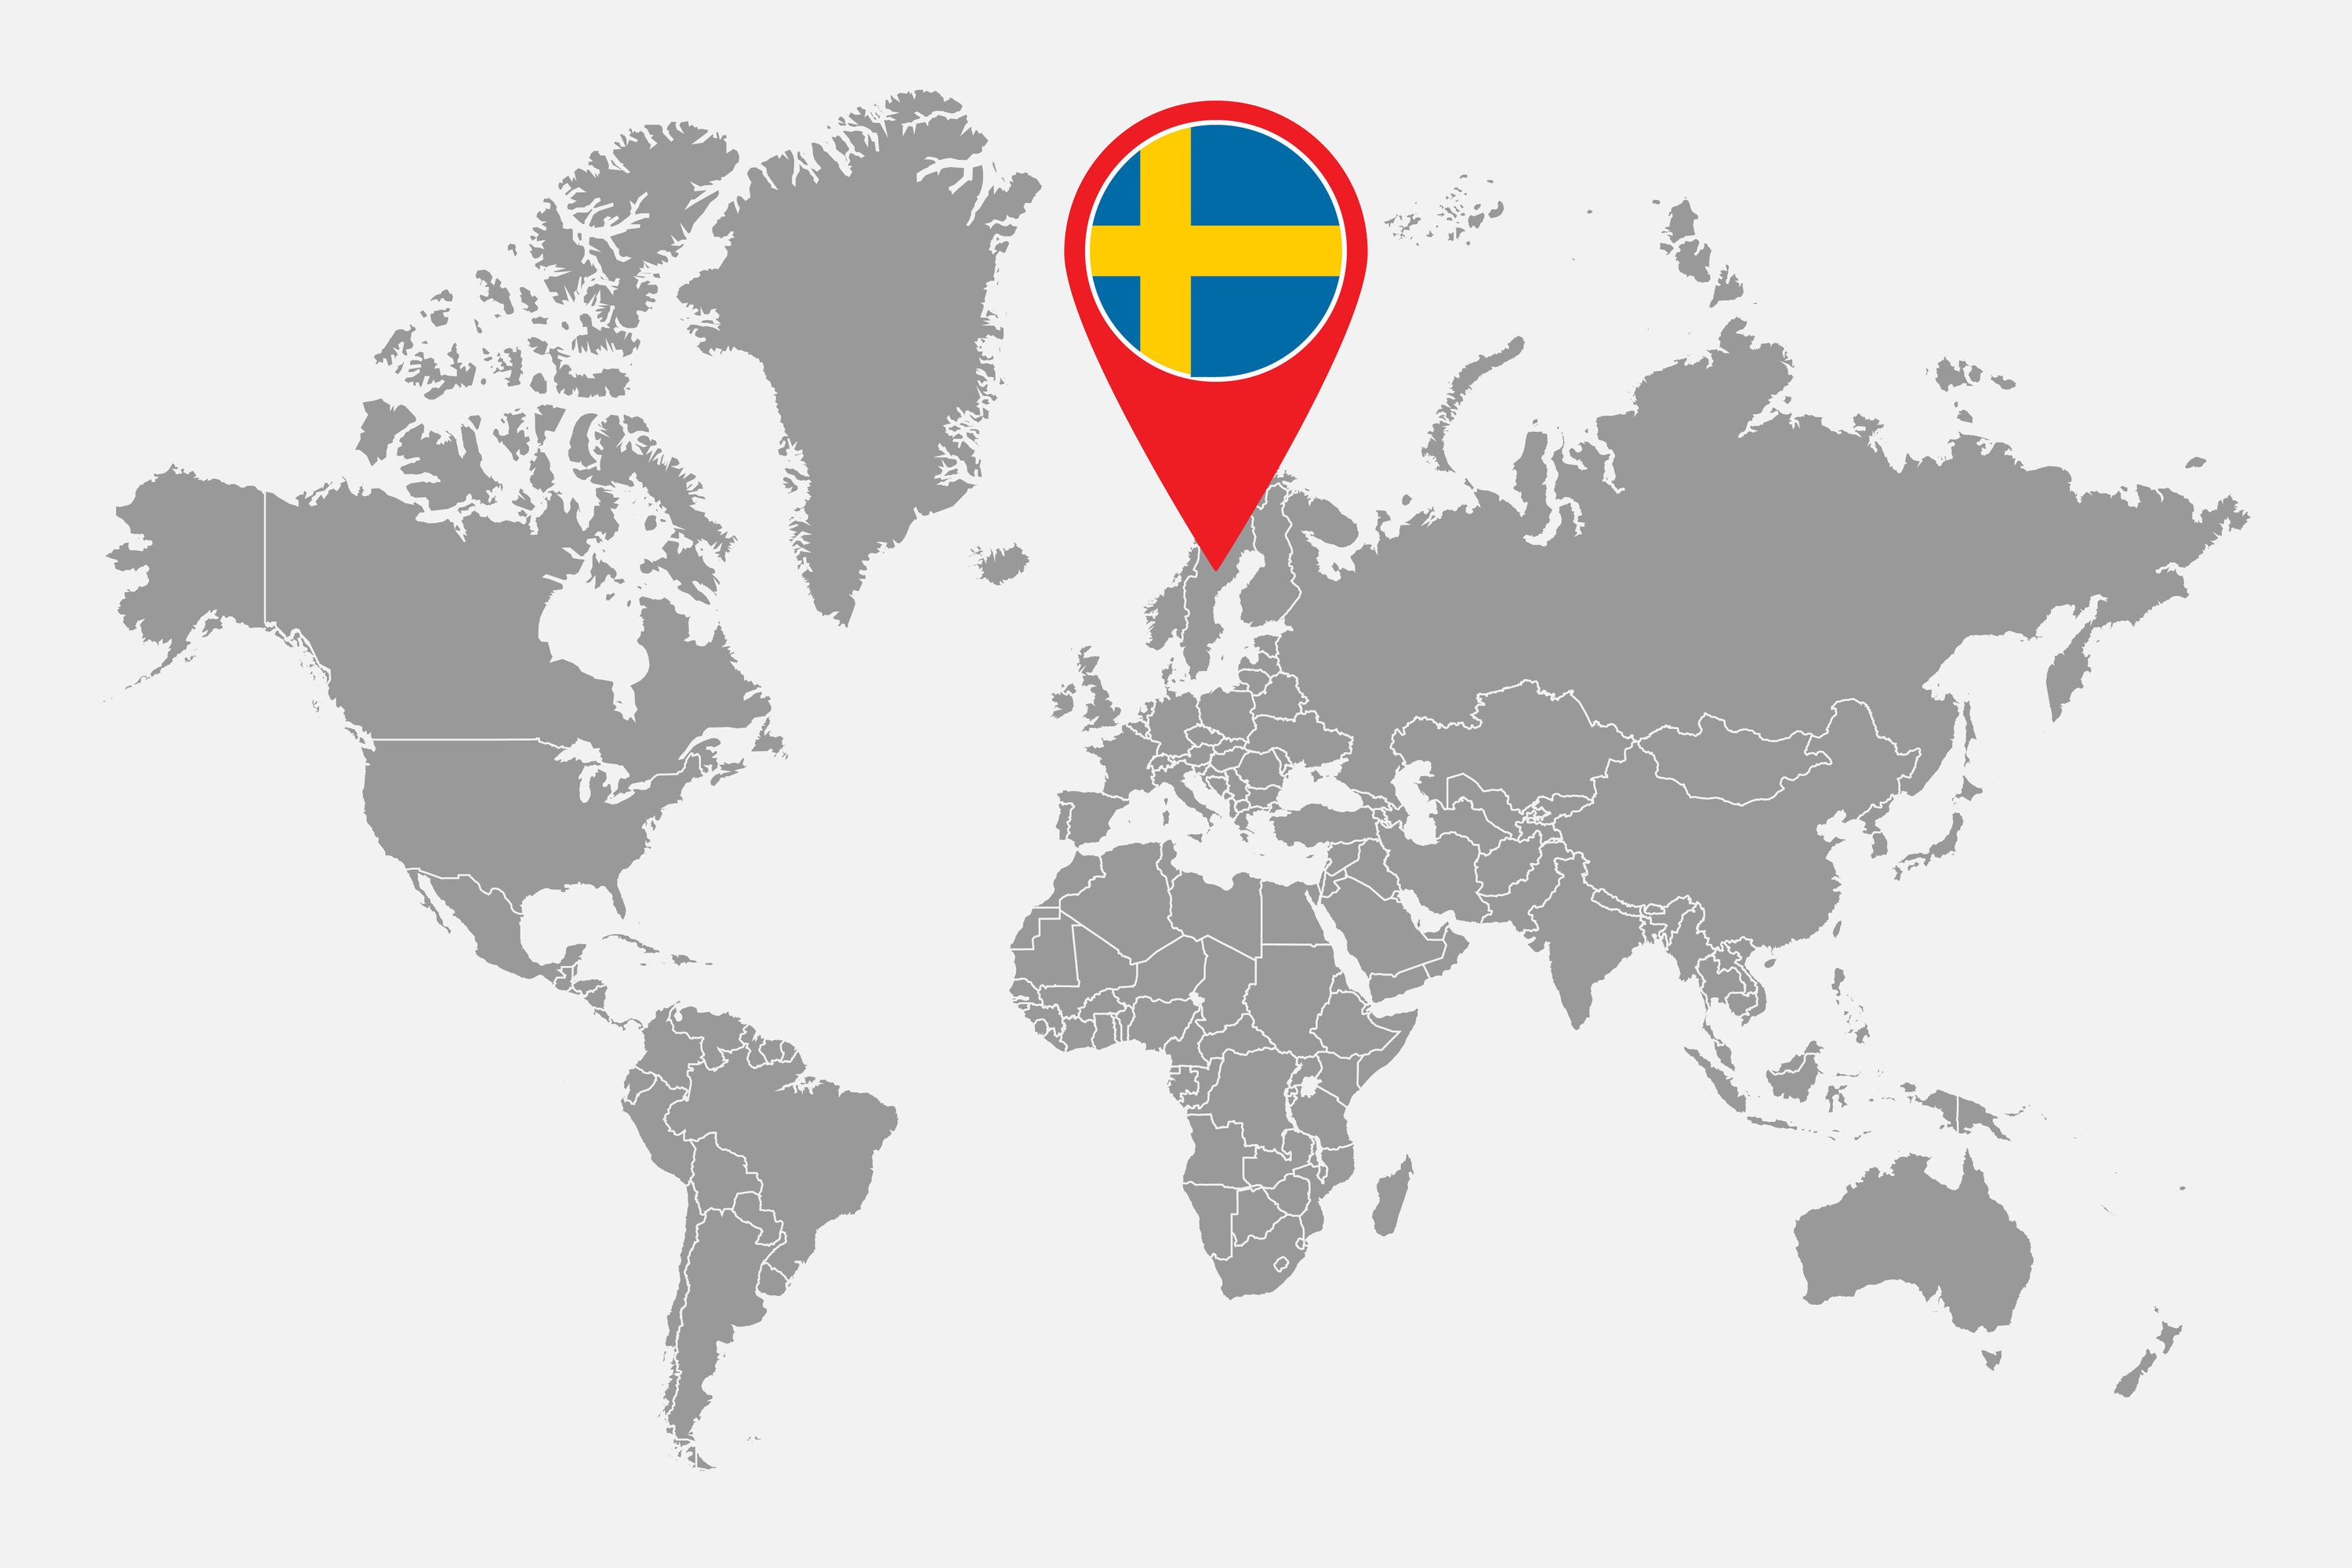 A world map with Sweden indicated